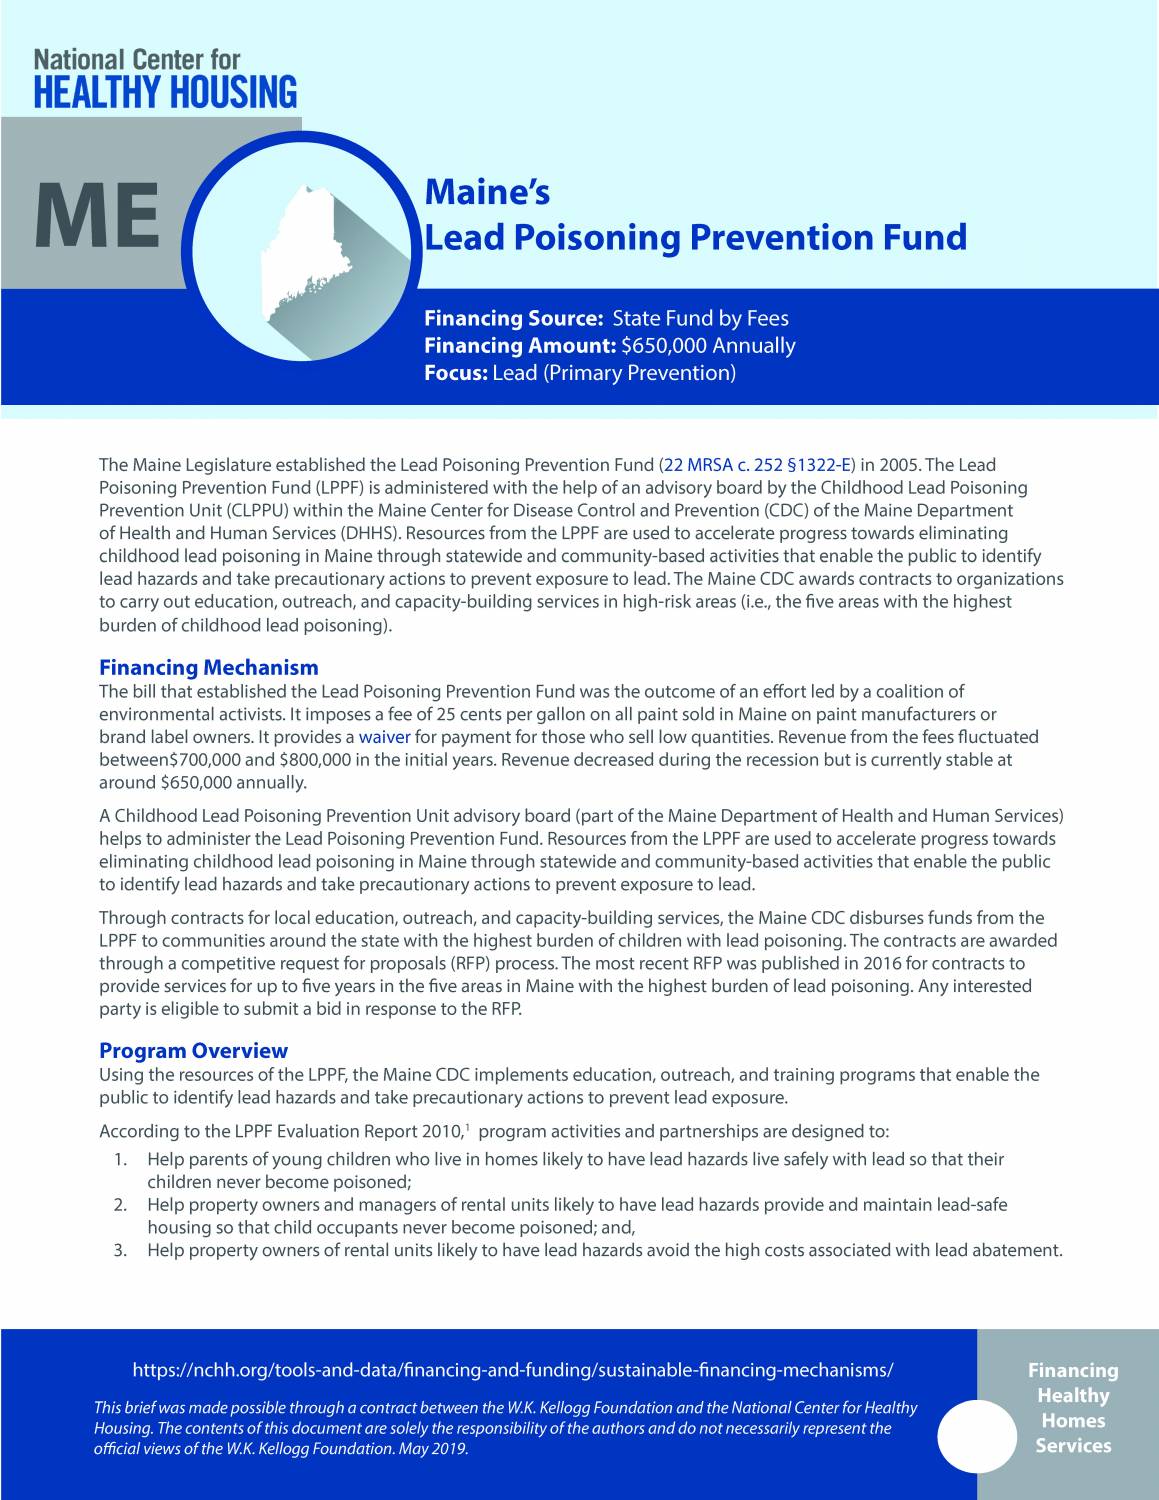 Sustainable Financing Mechanisms: Maine's Lead Poisoning Prevention Fund